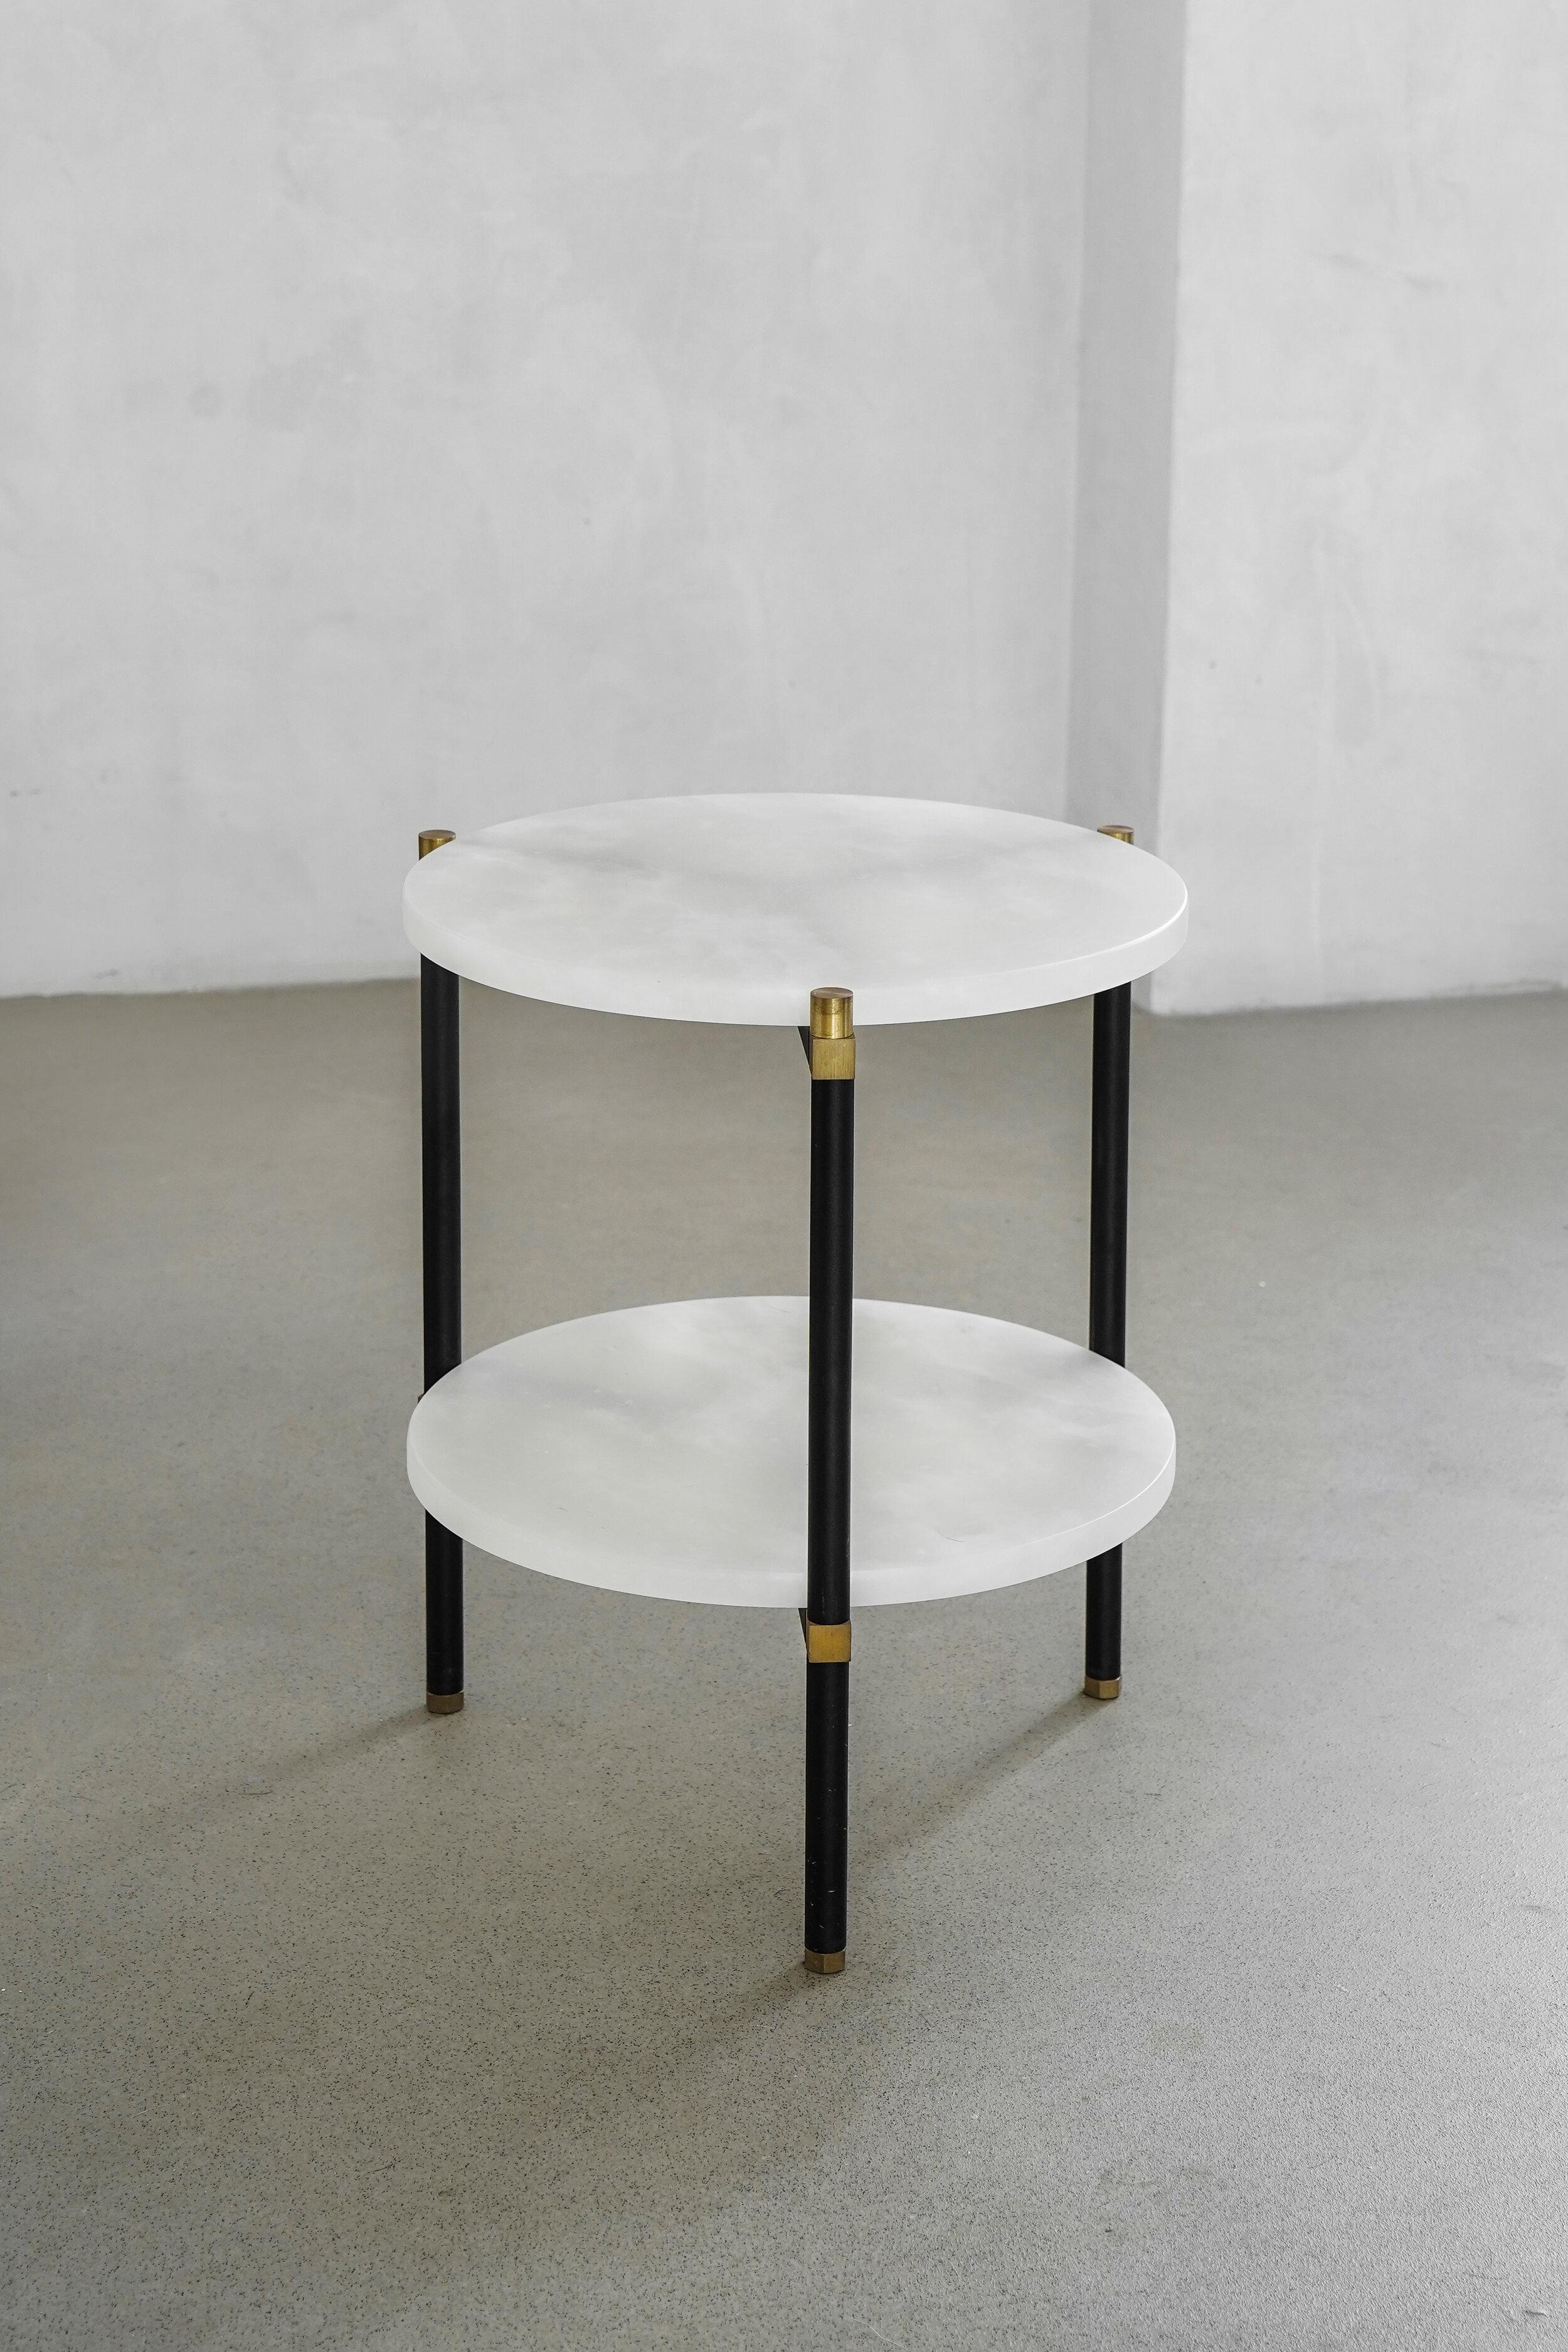 Double side table 40 3 legs by Contain
Dimensions: D 40 x H 51 cm 
Materials: Iron, brass, Terrazzo, marble, stone.
Available in different finishes and dimensions.

The Connector furniture collection is based on single assembly pieces that get